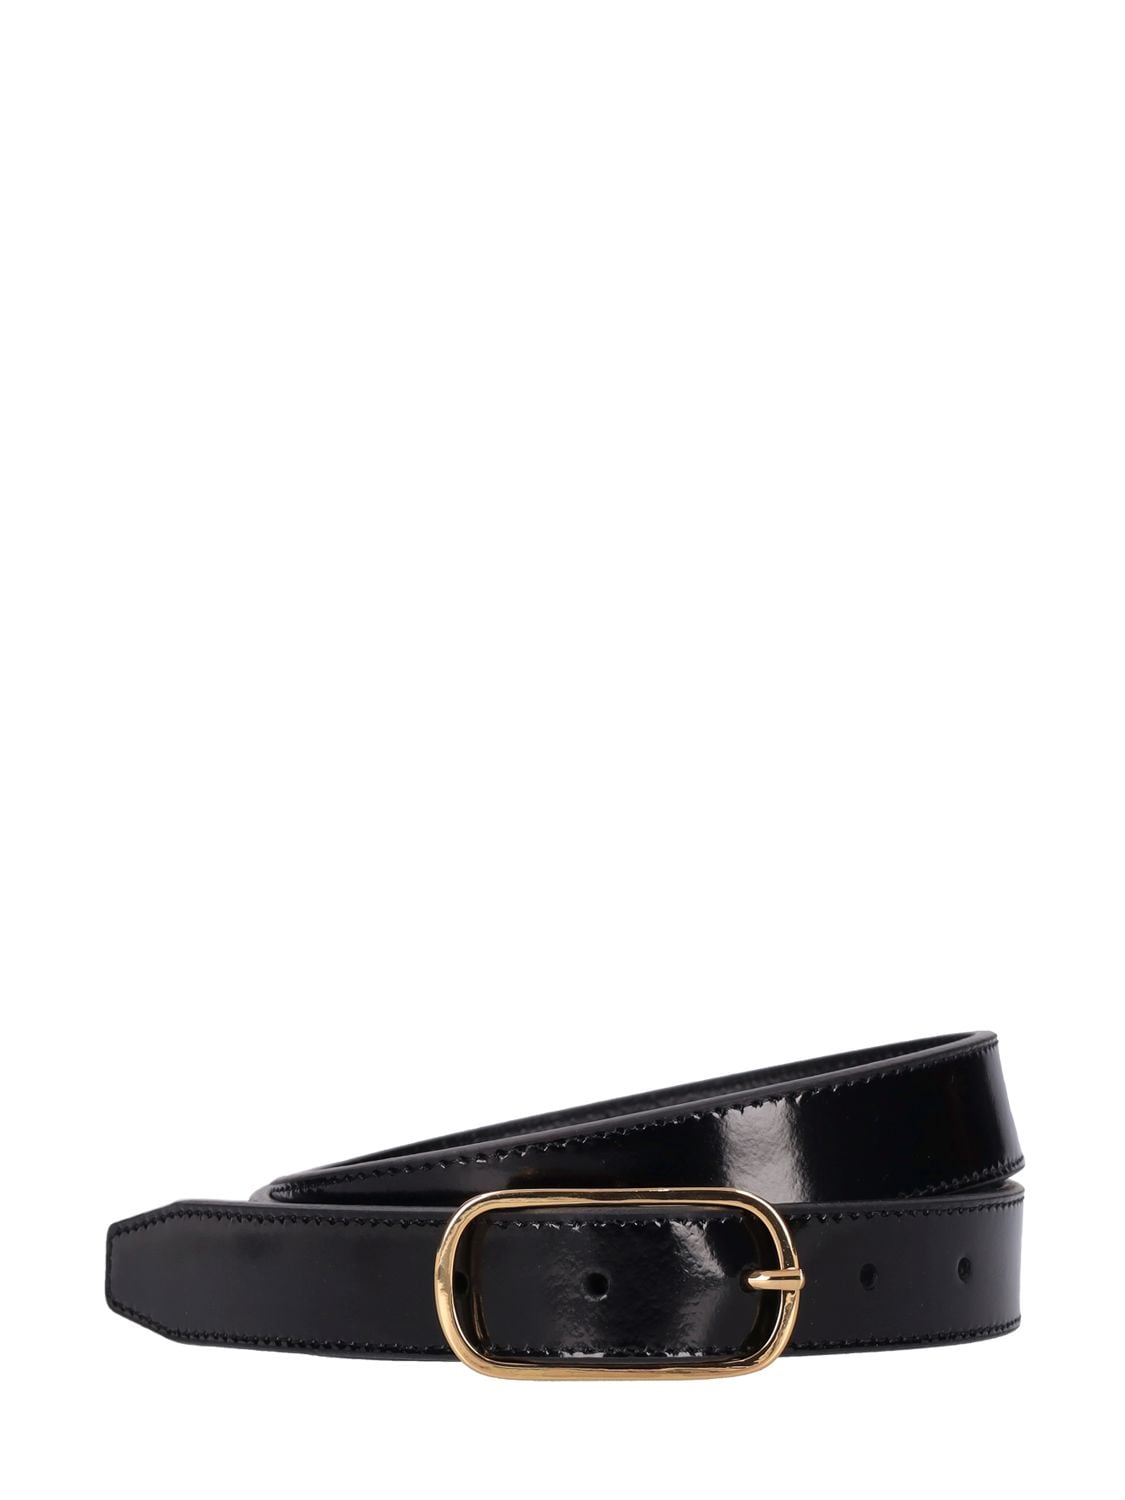 Image of 2.5cm Wide Oval Buckle Leather Belt